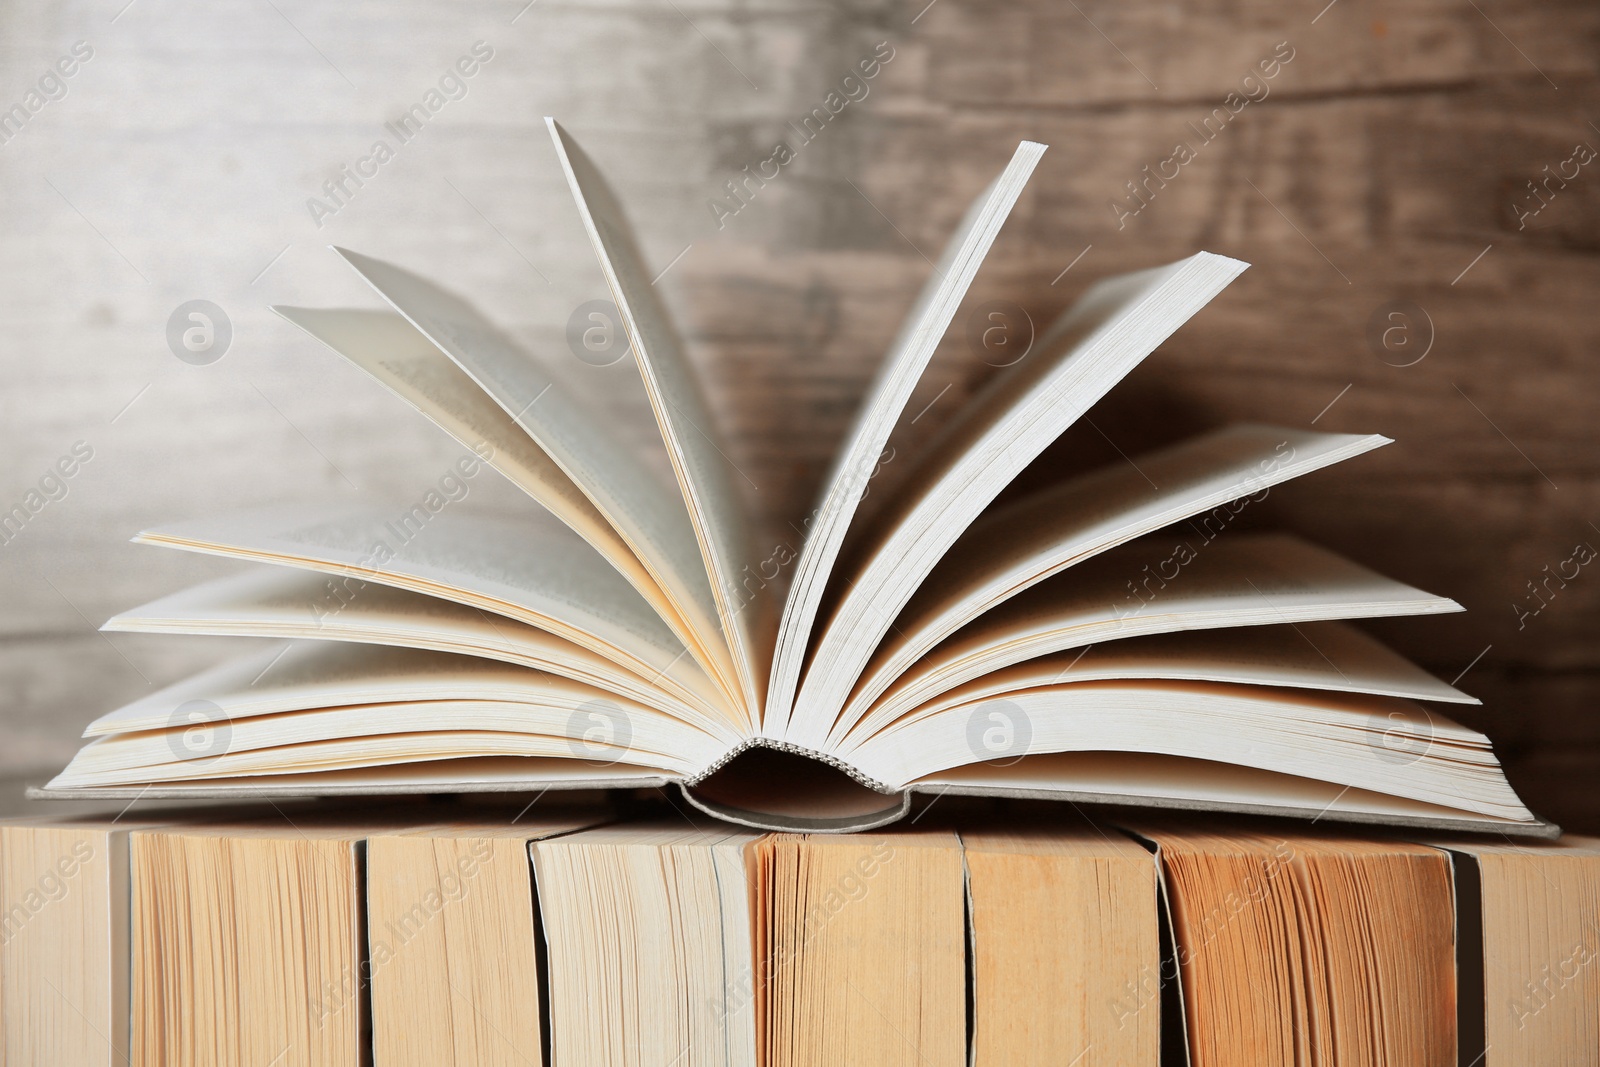 Photo of Different books against wooden background, closeup view